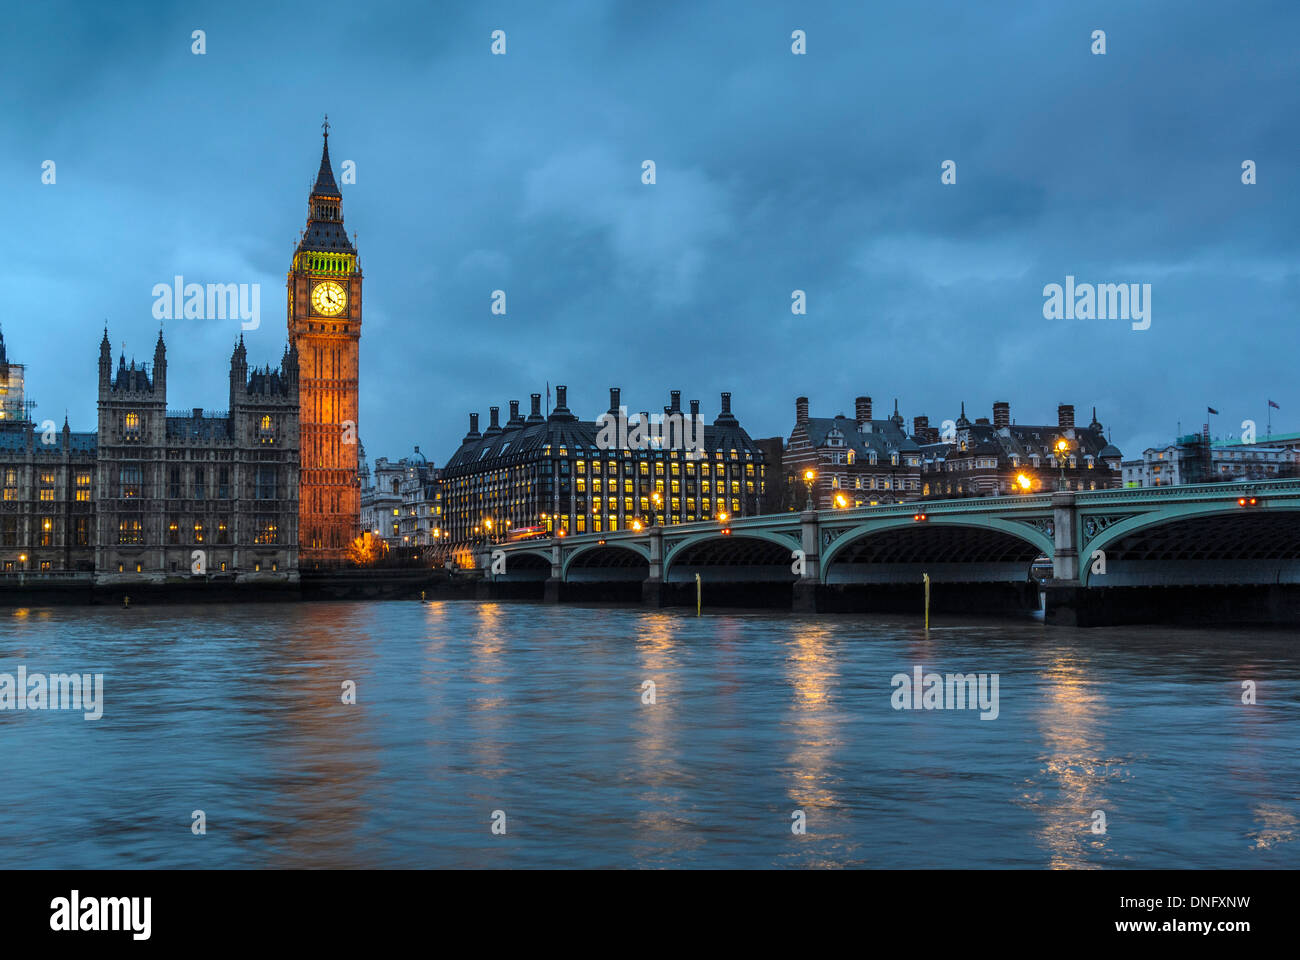 Big Ben and Houses of Parliament at dusk, Westminster, London. Stock Photo